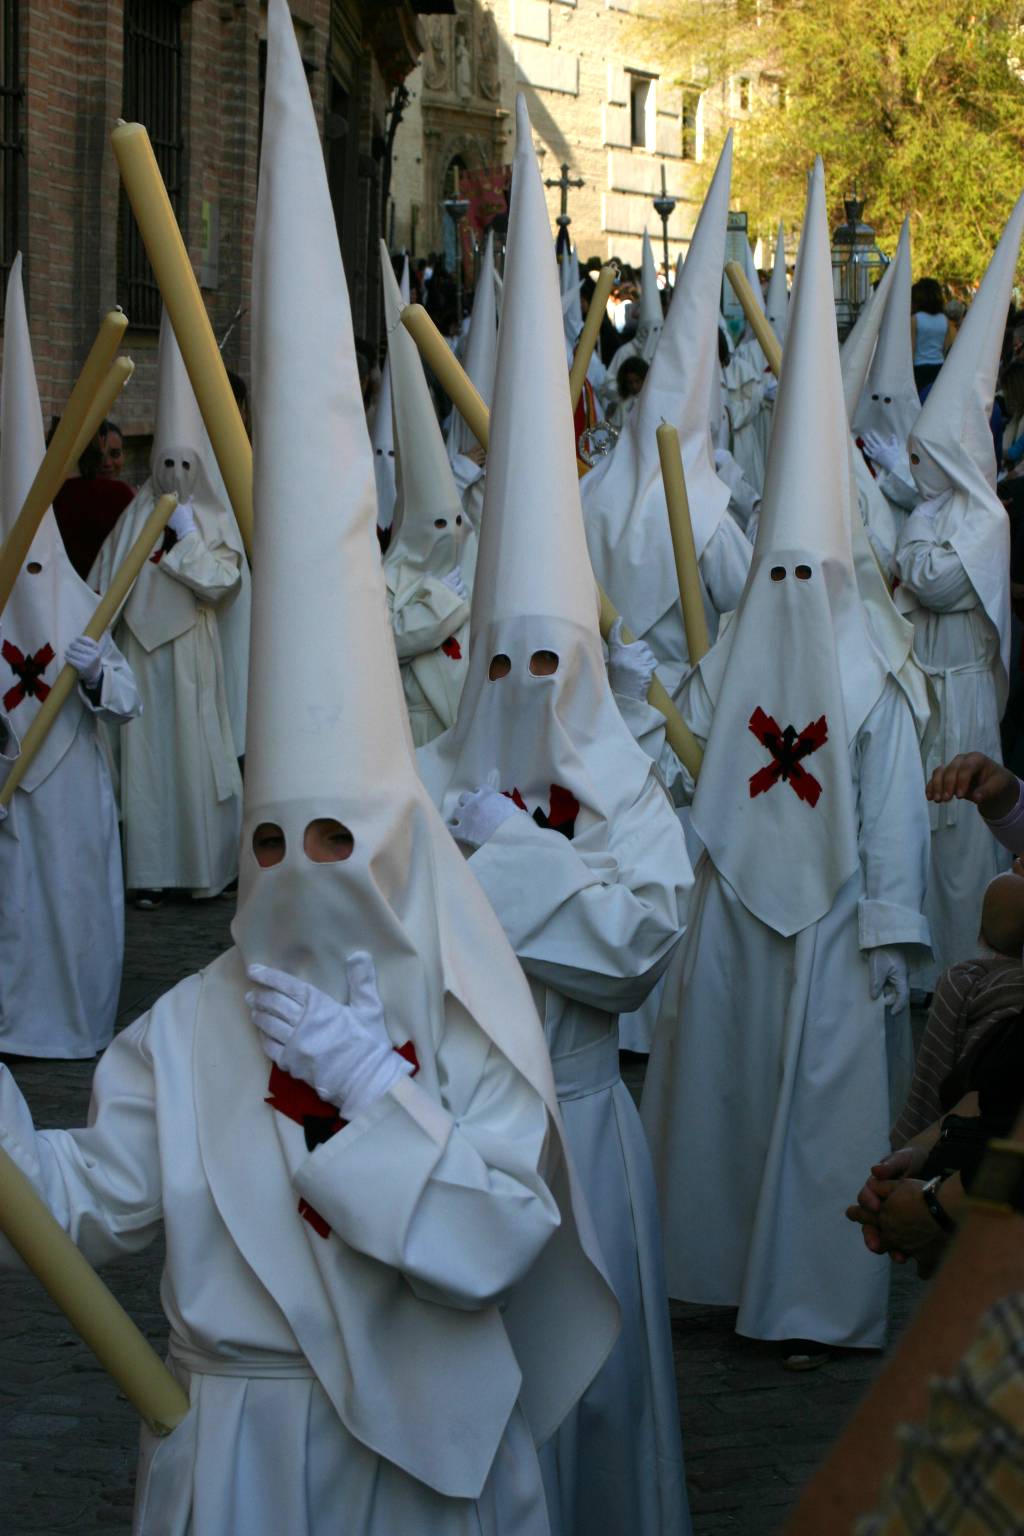 Not_what_you_may_think_-_these_are_nazarenos_%28hooded_penitents%29_in_the_Holy_Week_parade_in_Granada_%28IMG_5519a%29.jpg